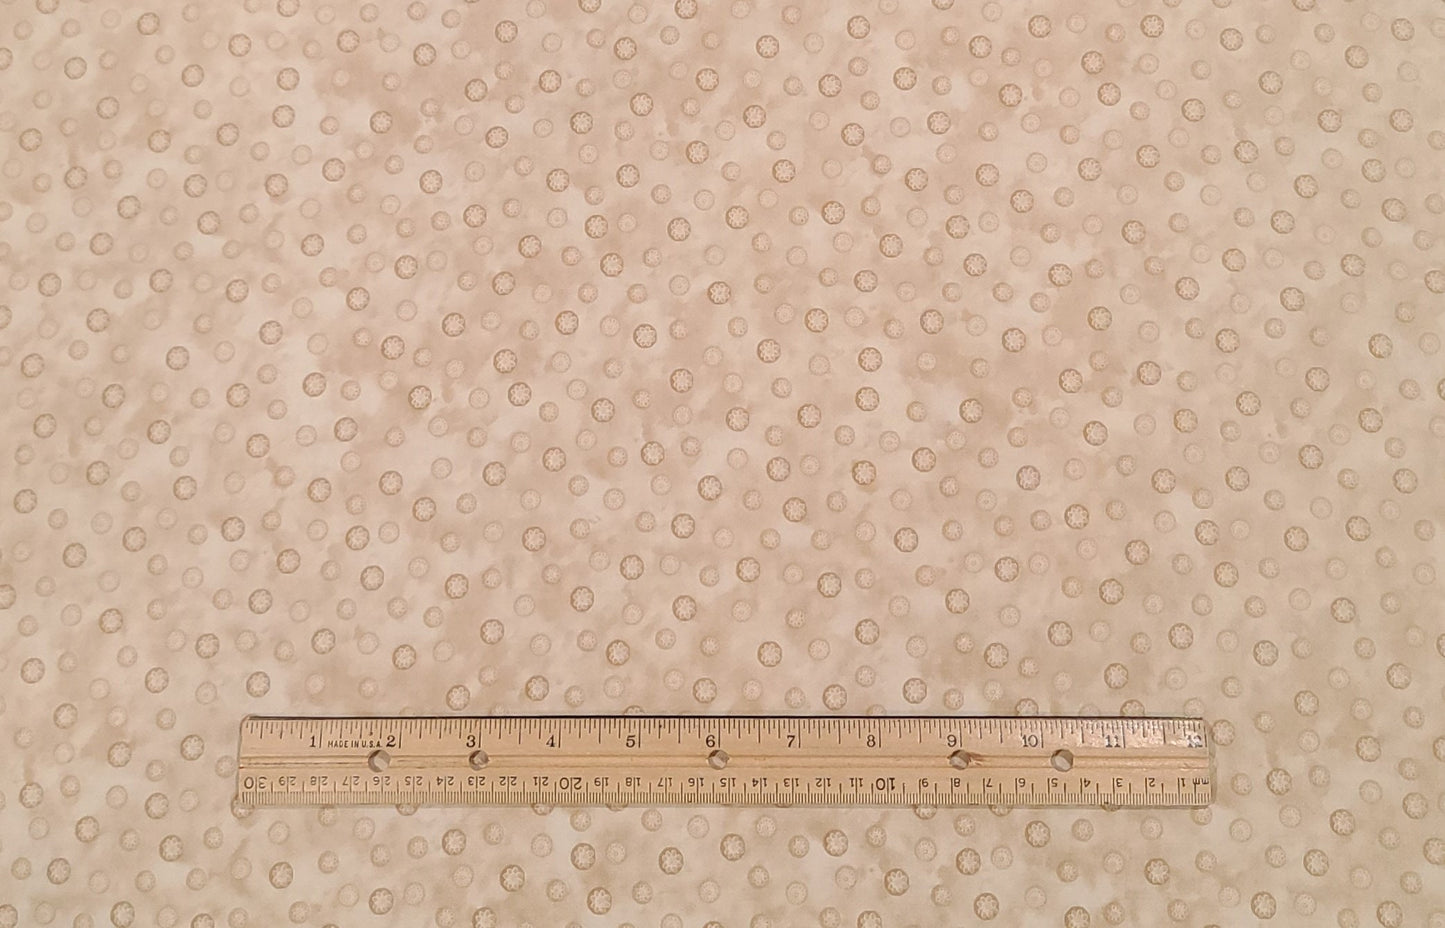 EOB - Creamery Neutrals 2 by The Buggy Barn for Henry Glass & Co Pattern 1397 - Tan and Cream Tonal Fabric / Tan Flower "Button" Print